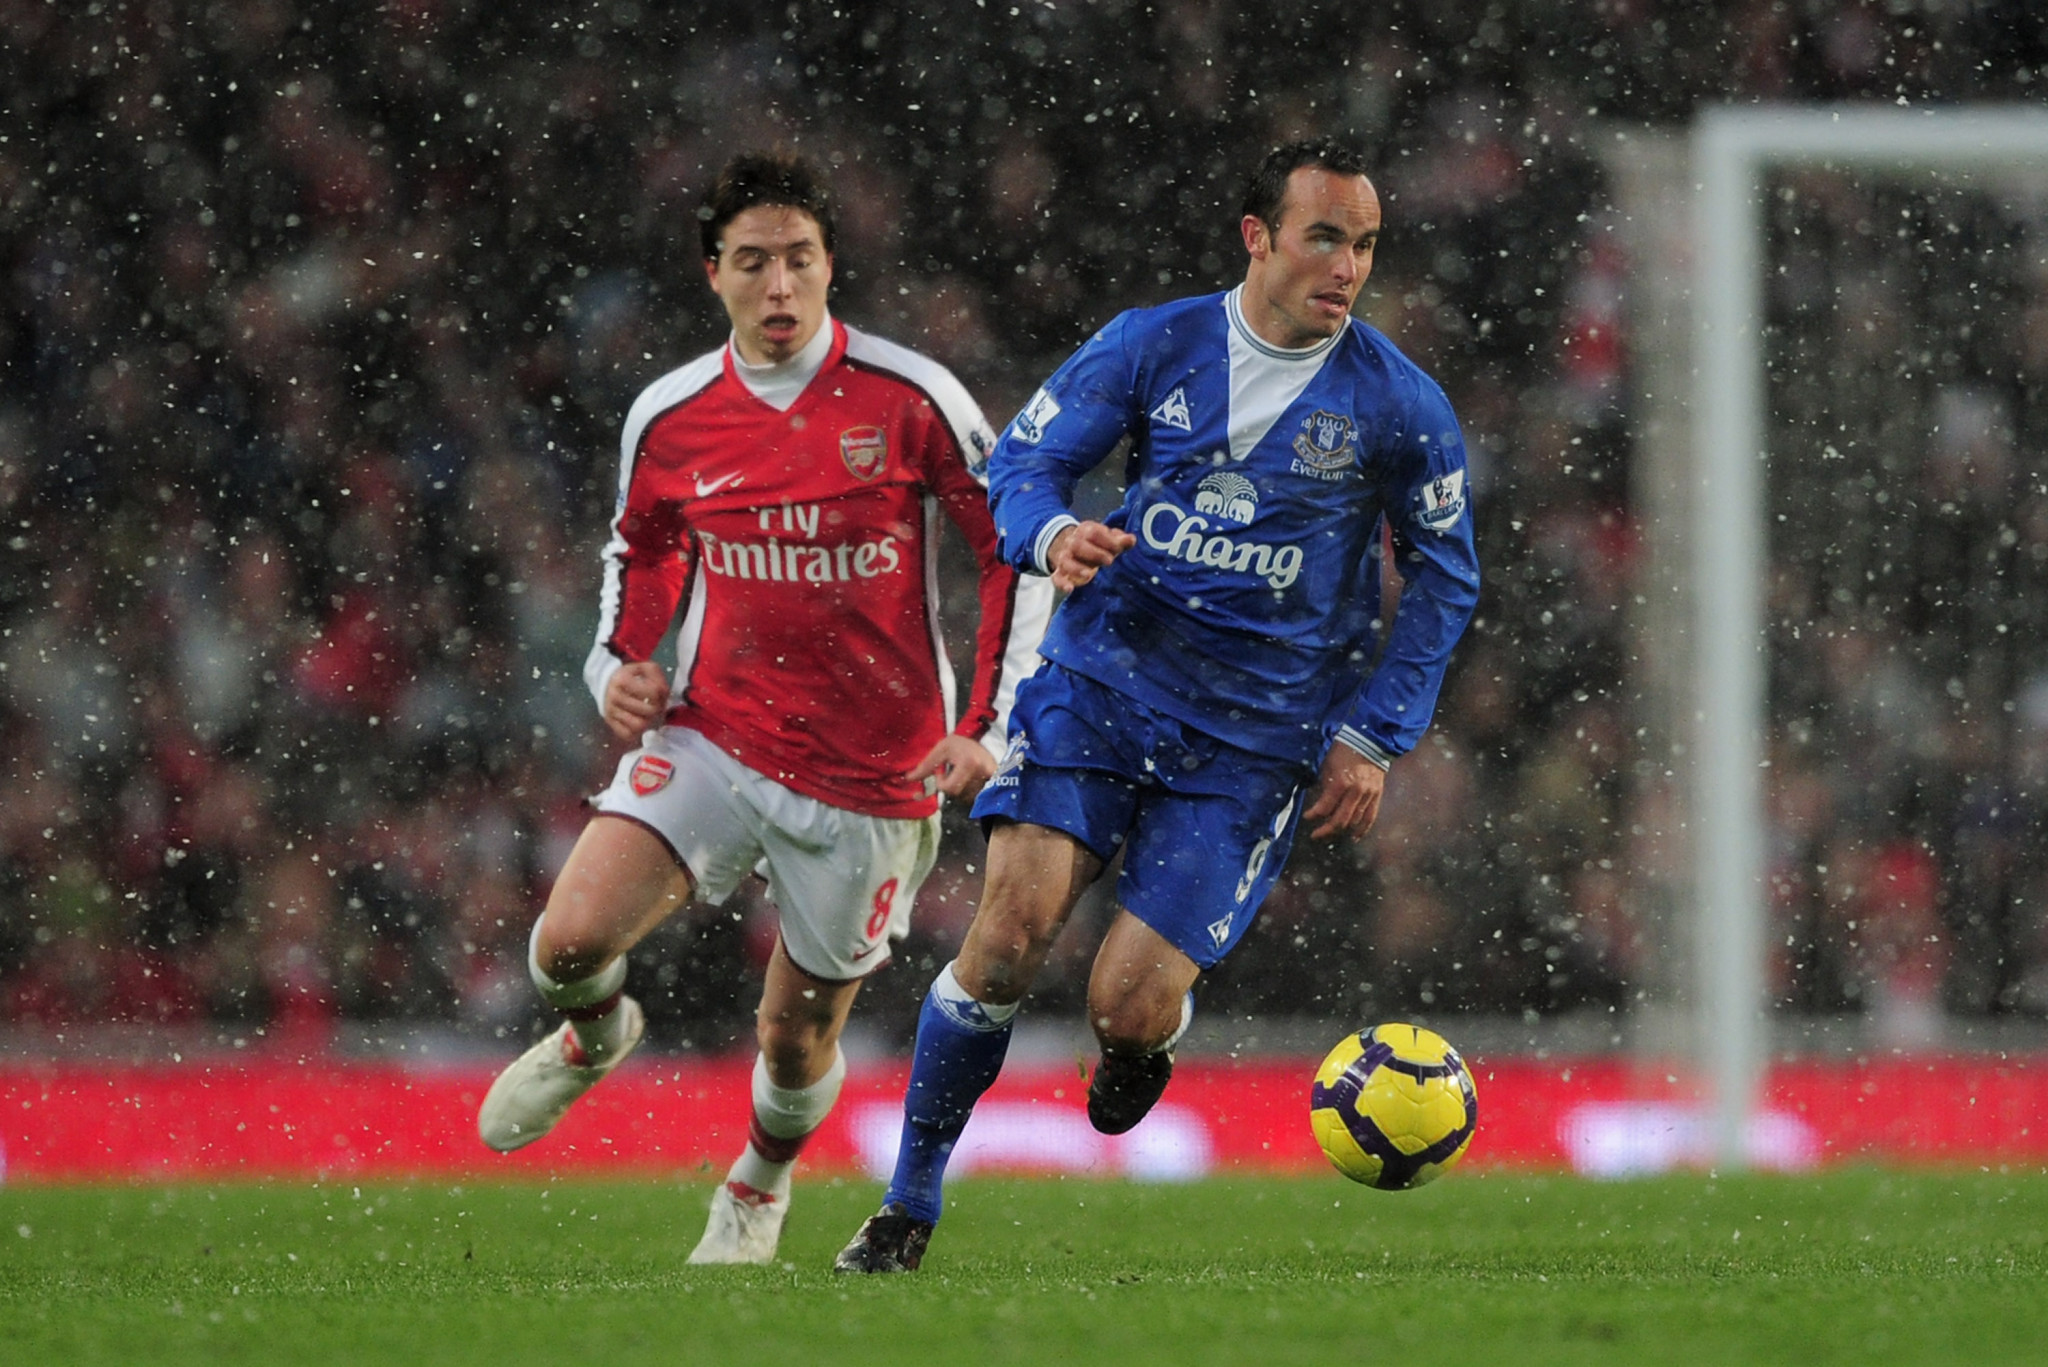 Landon Donovan was a thorn in the side of Arsenal during his stint at Everton in 2010 ©Getty Images